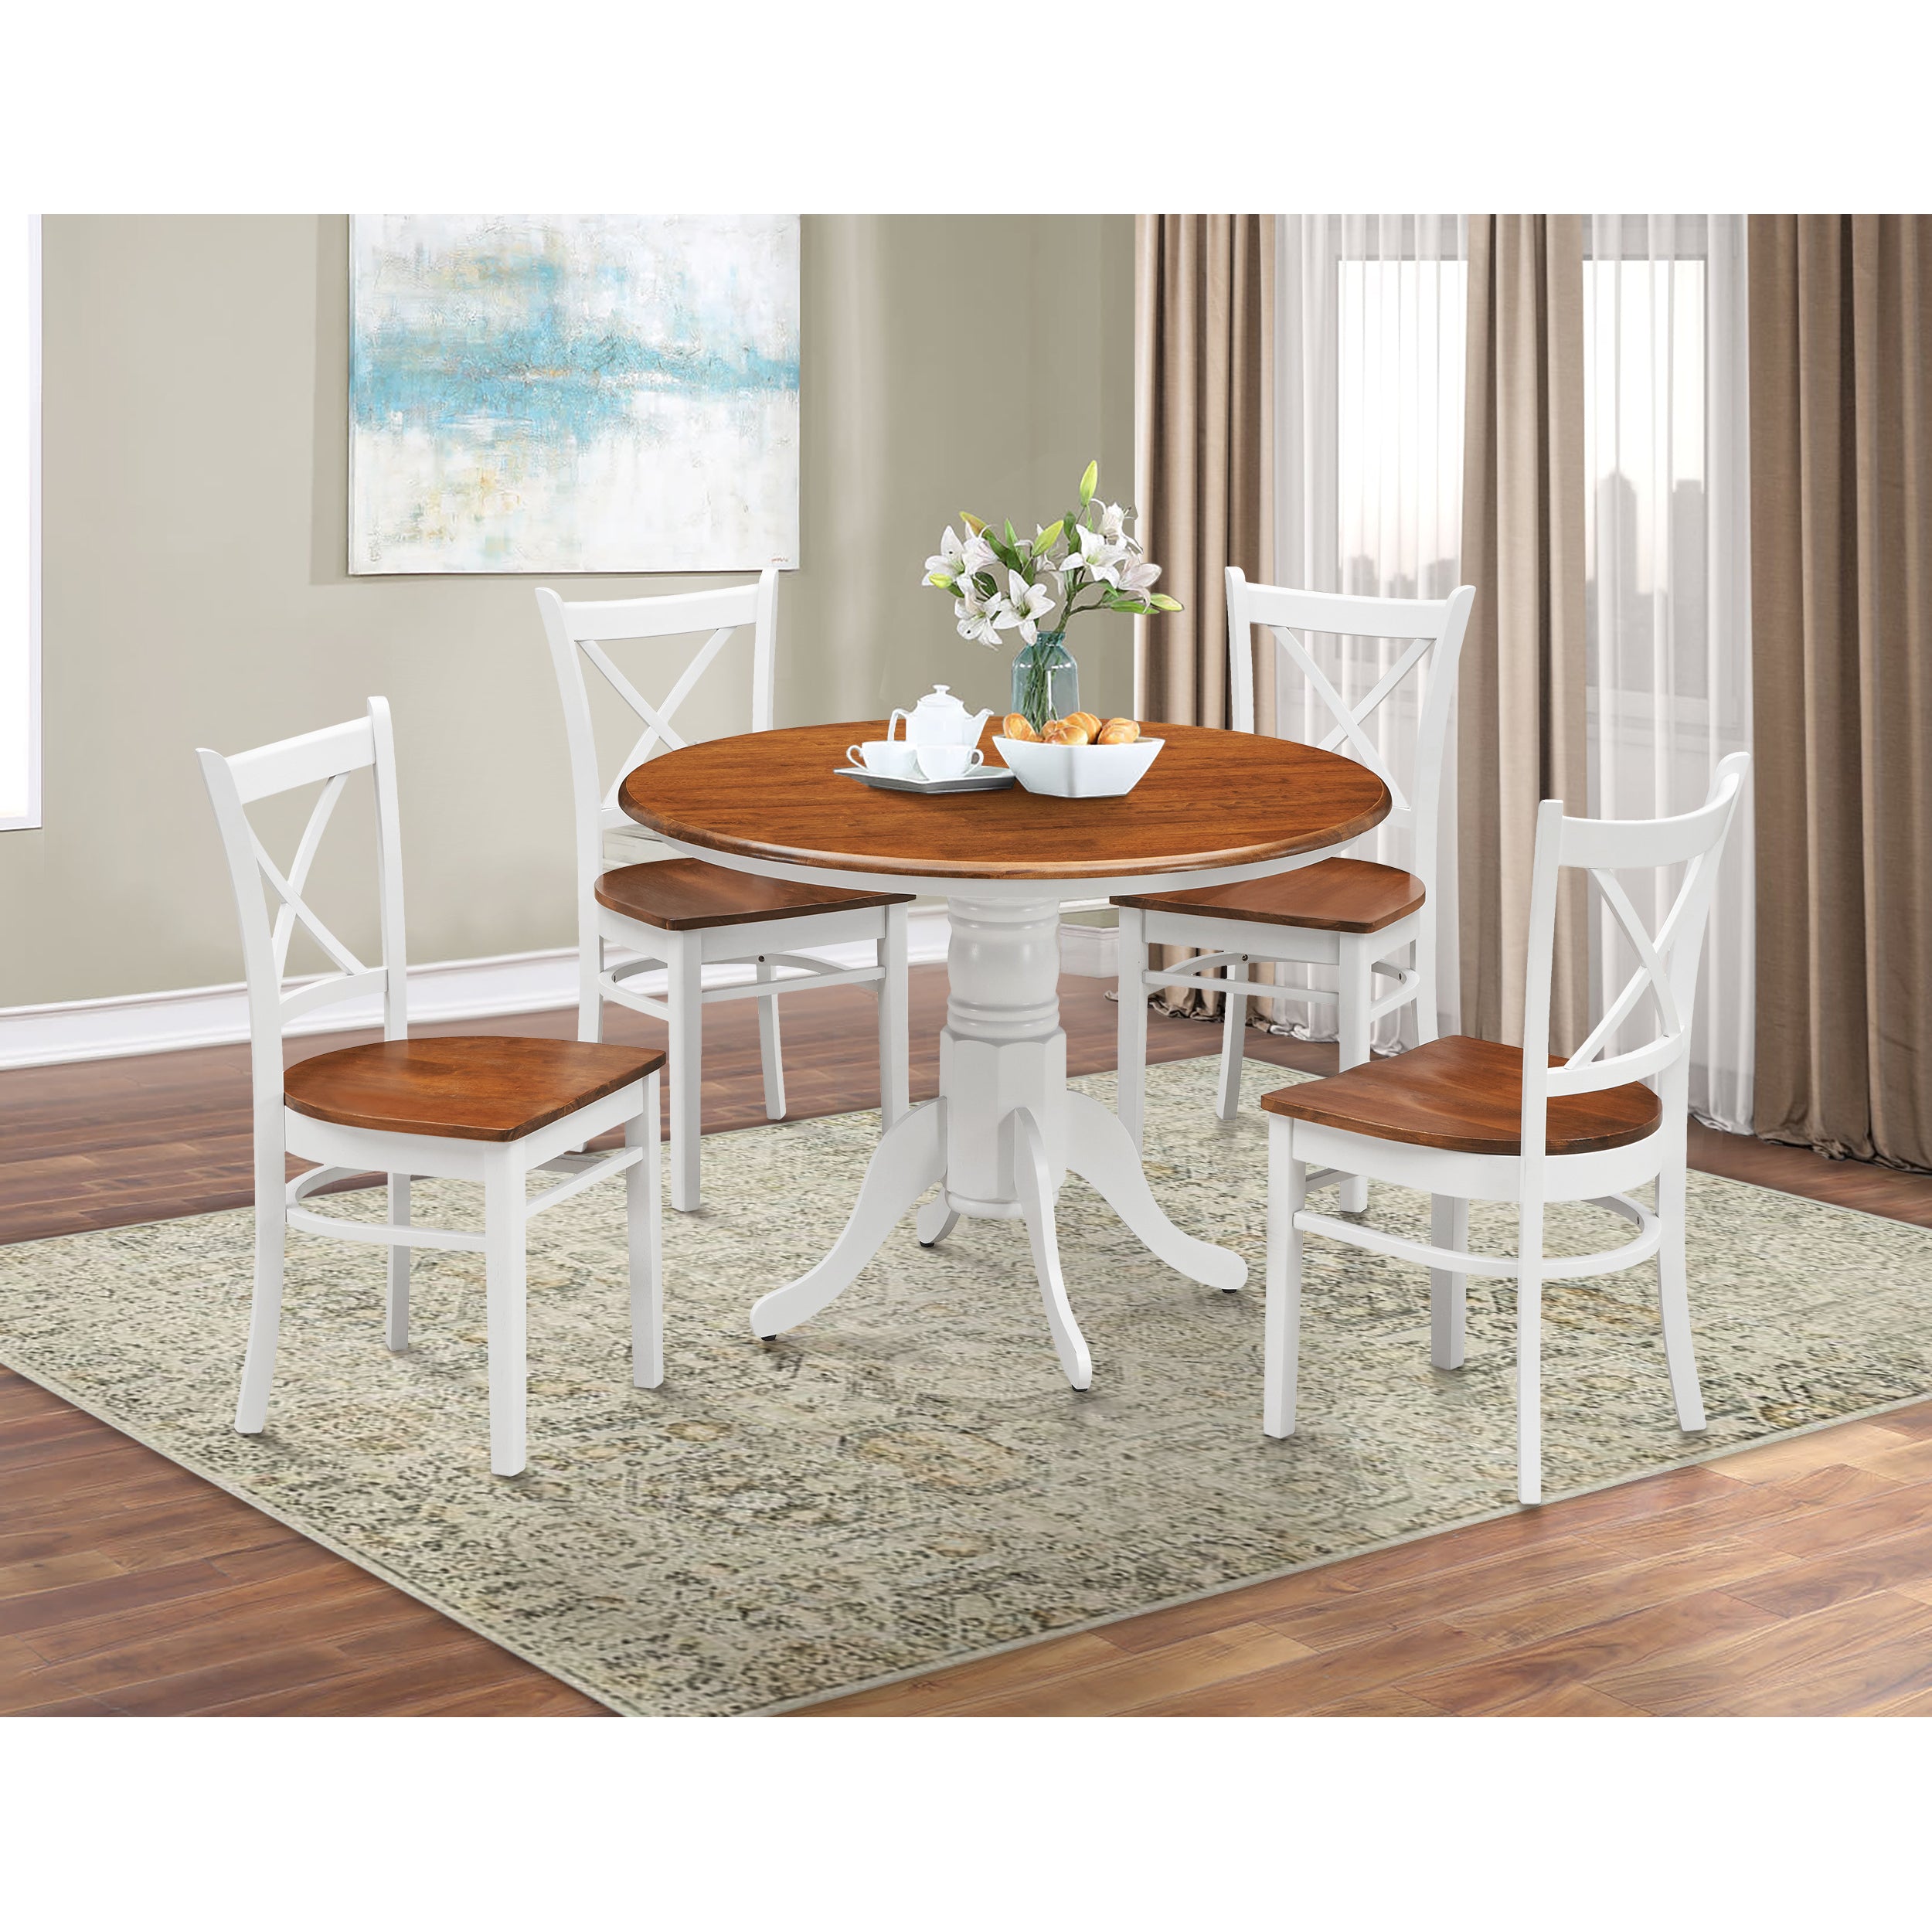 8 pcs Classic Crossback Dining Chair Set - Solid Rubber Wood - White Oak Finish